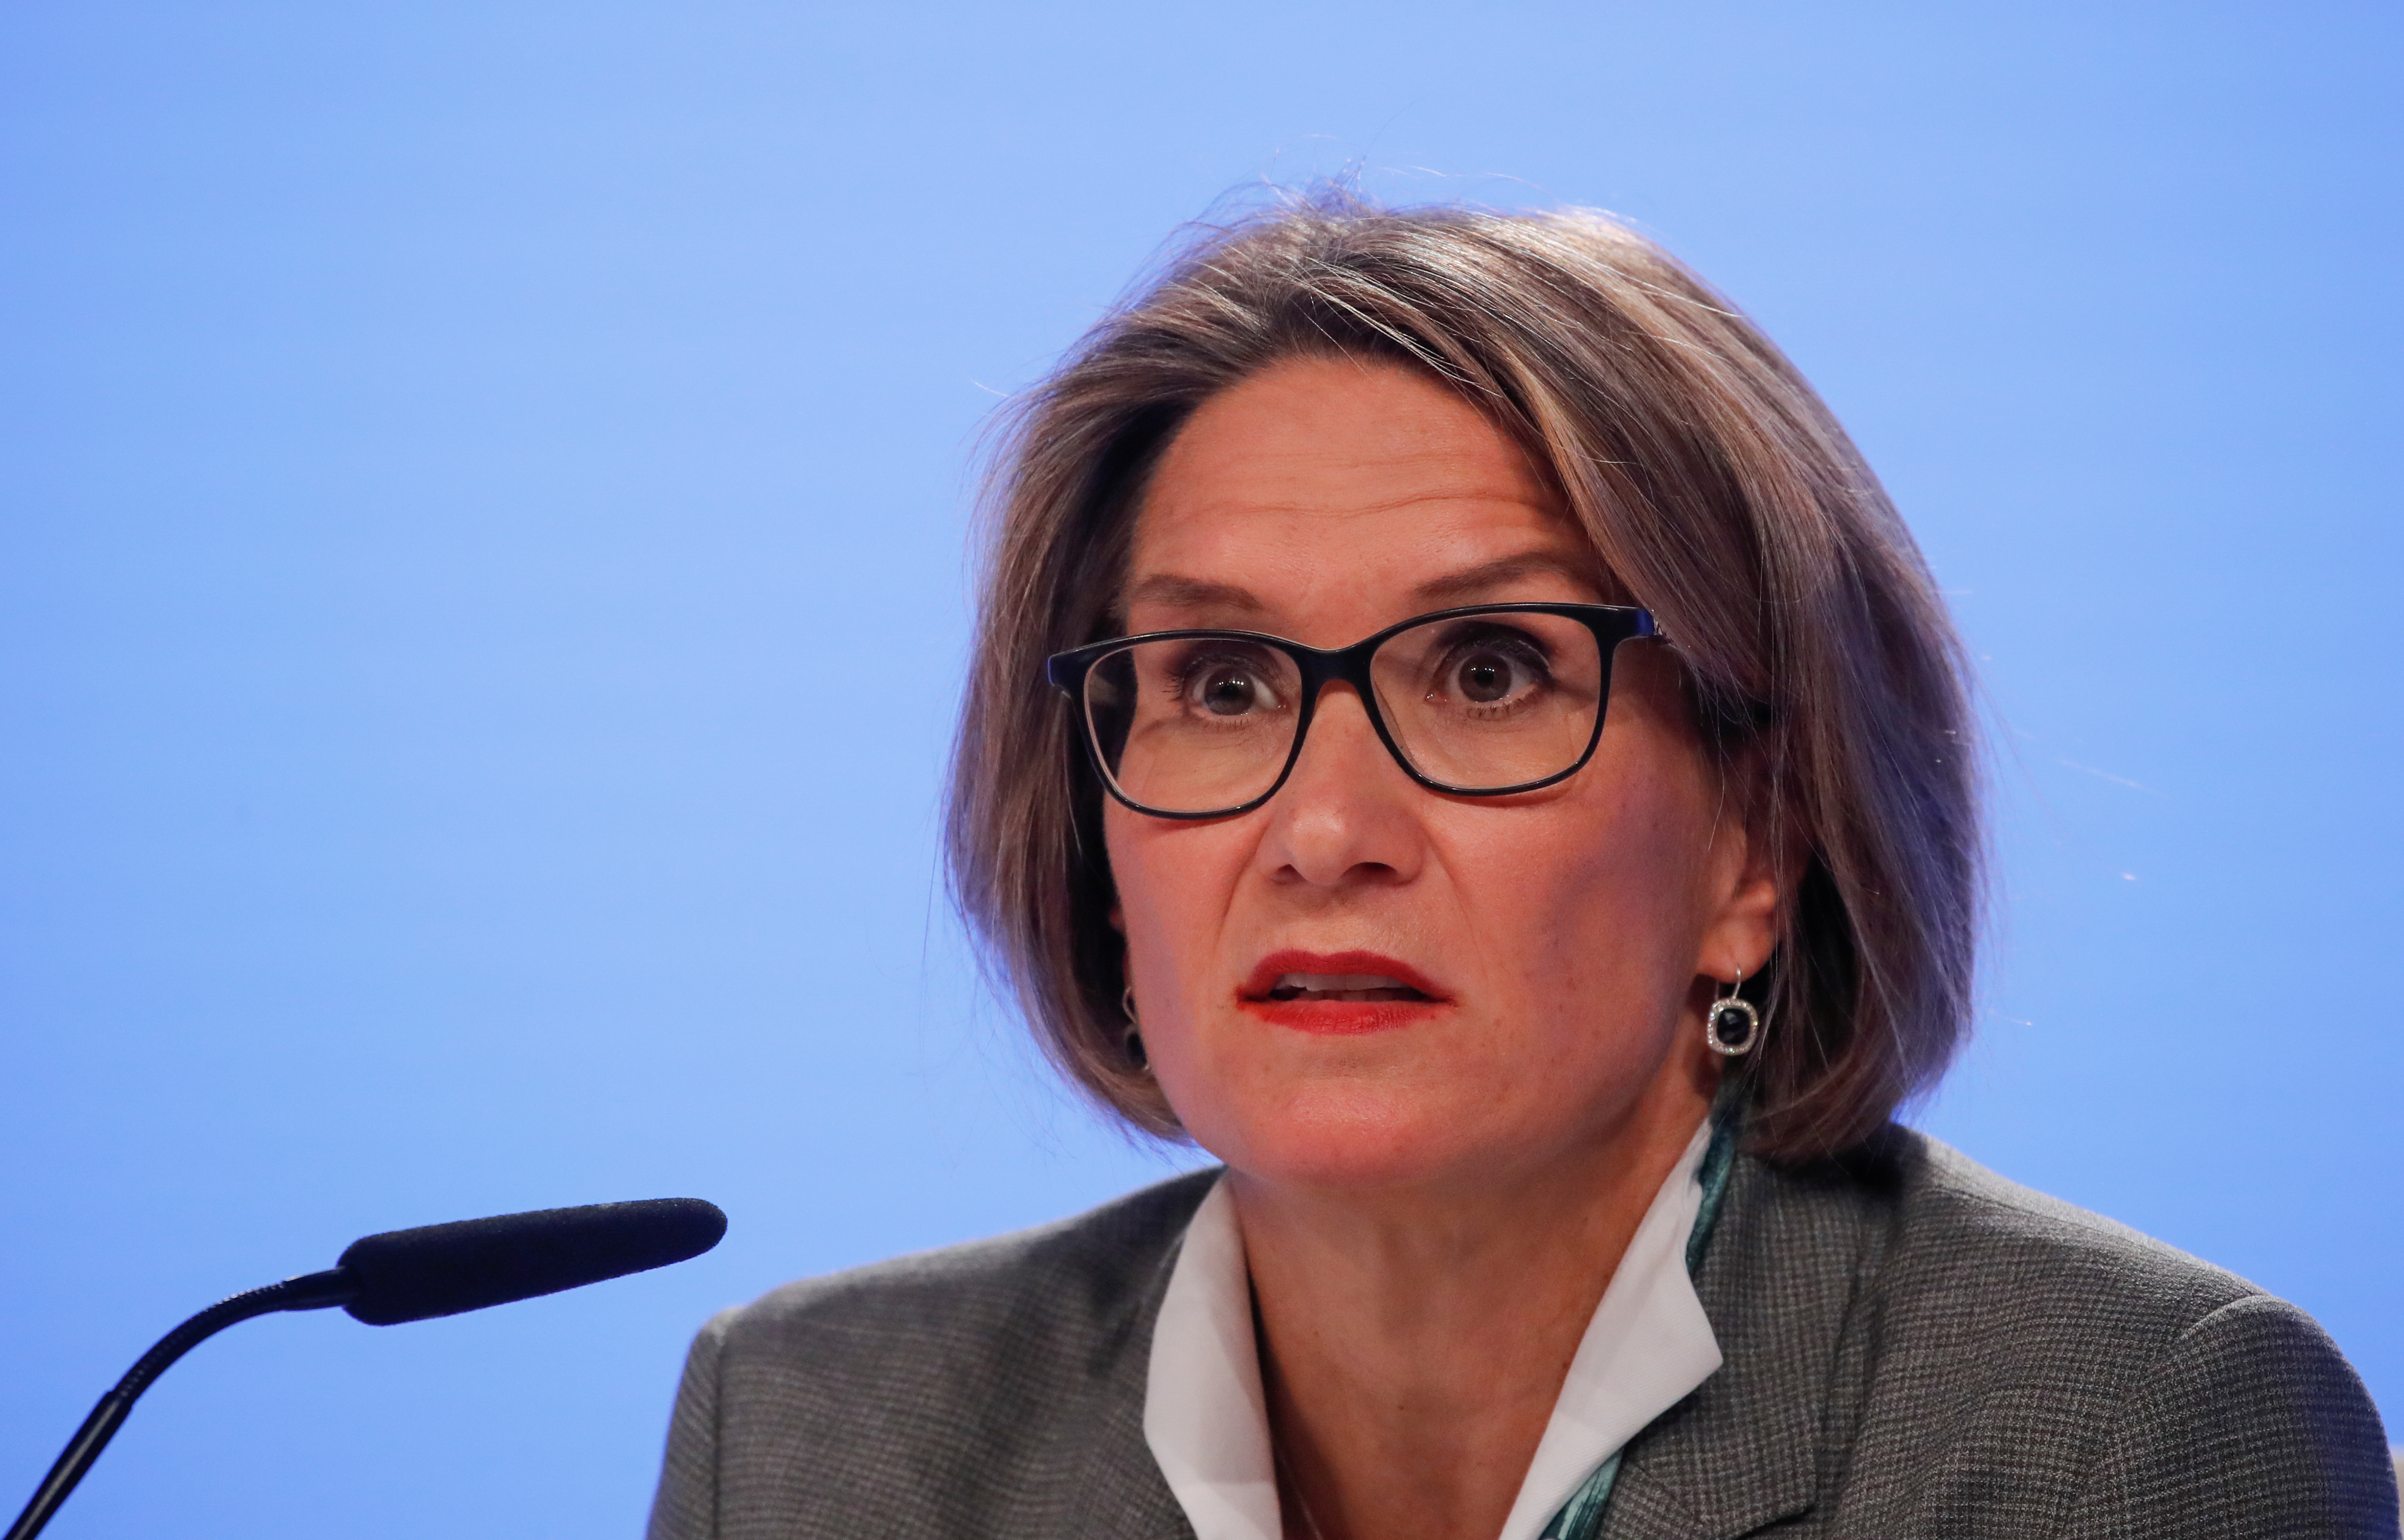 Swiss National Bank (SNB) Governing Board member Andrea Maechler speaks as she attends a news conference in Bern